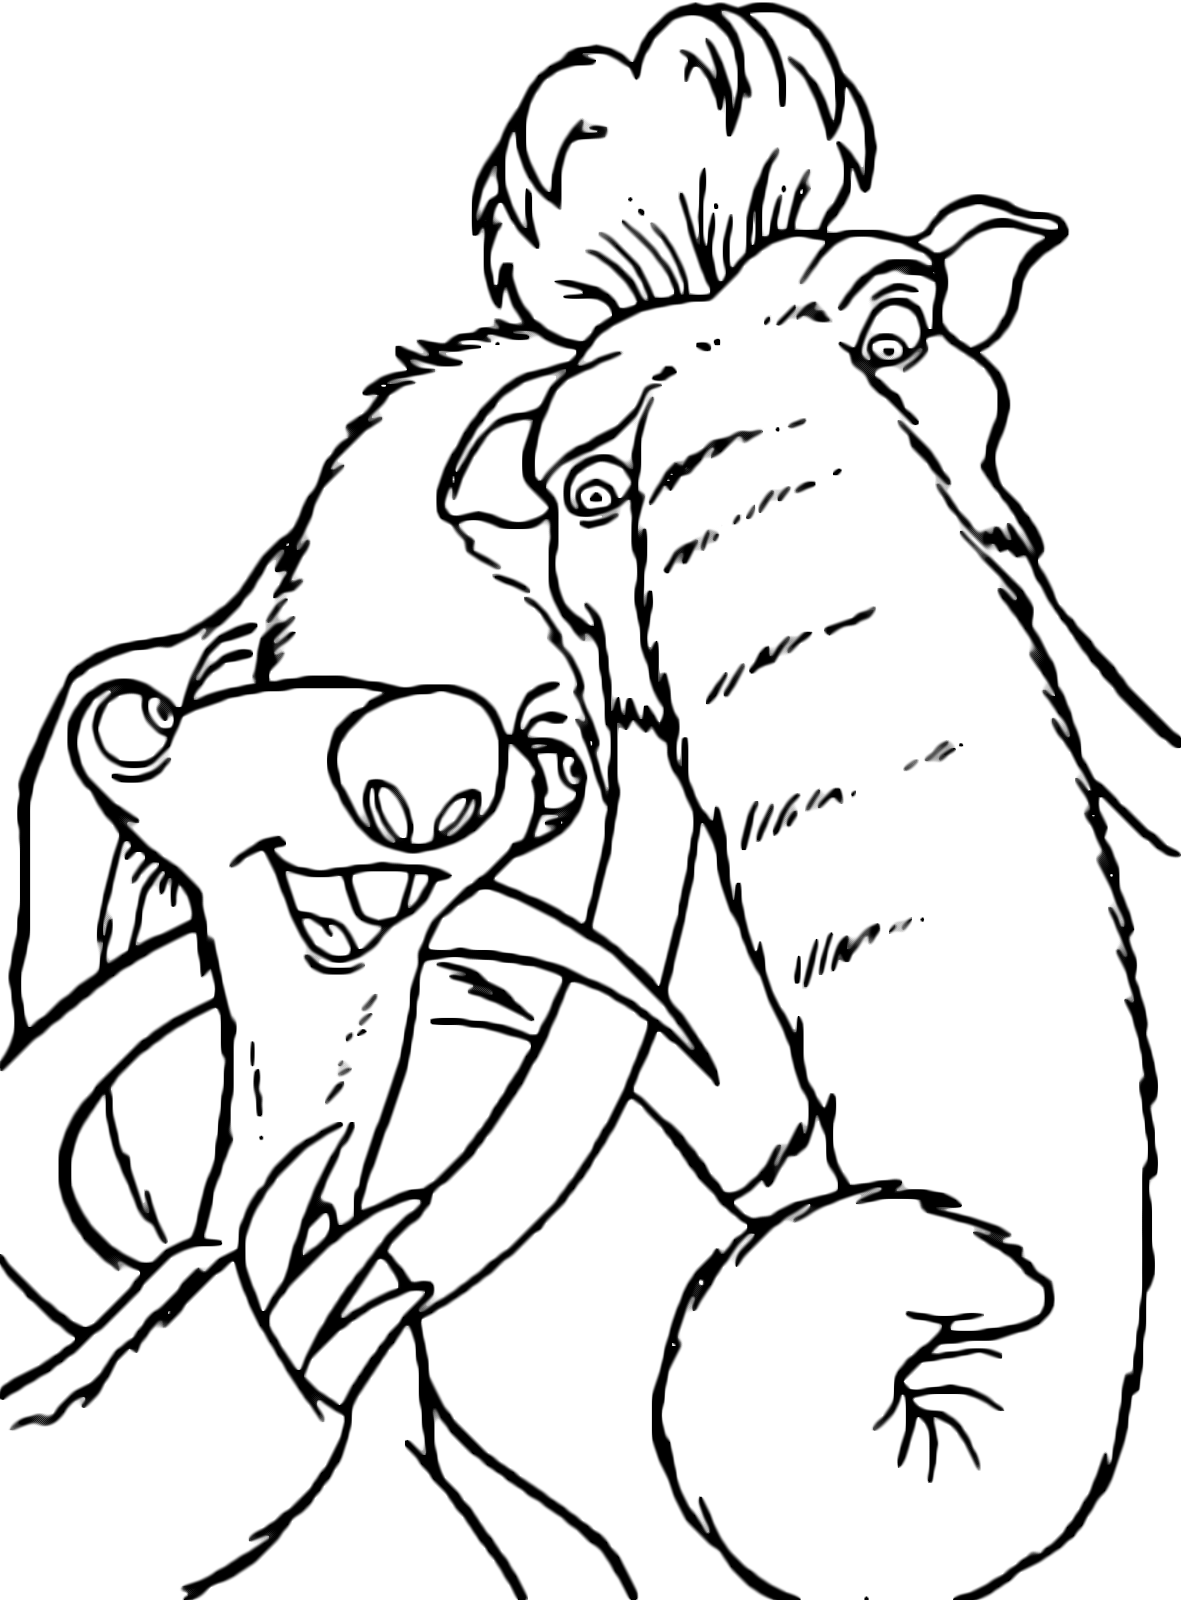 sid the sloth coloring page